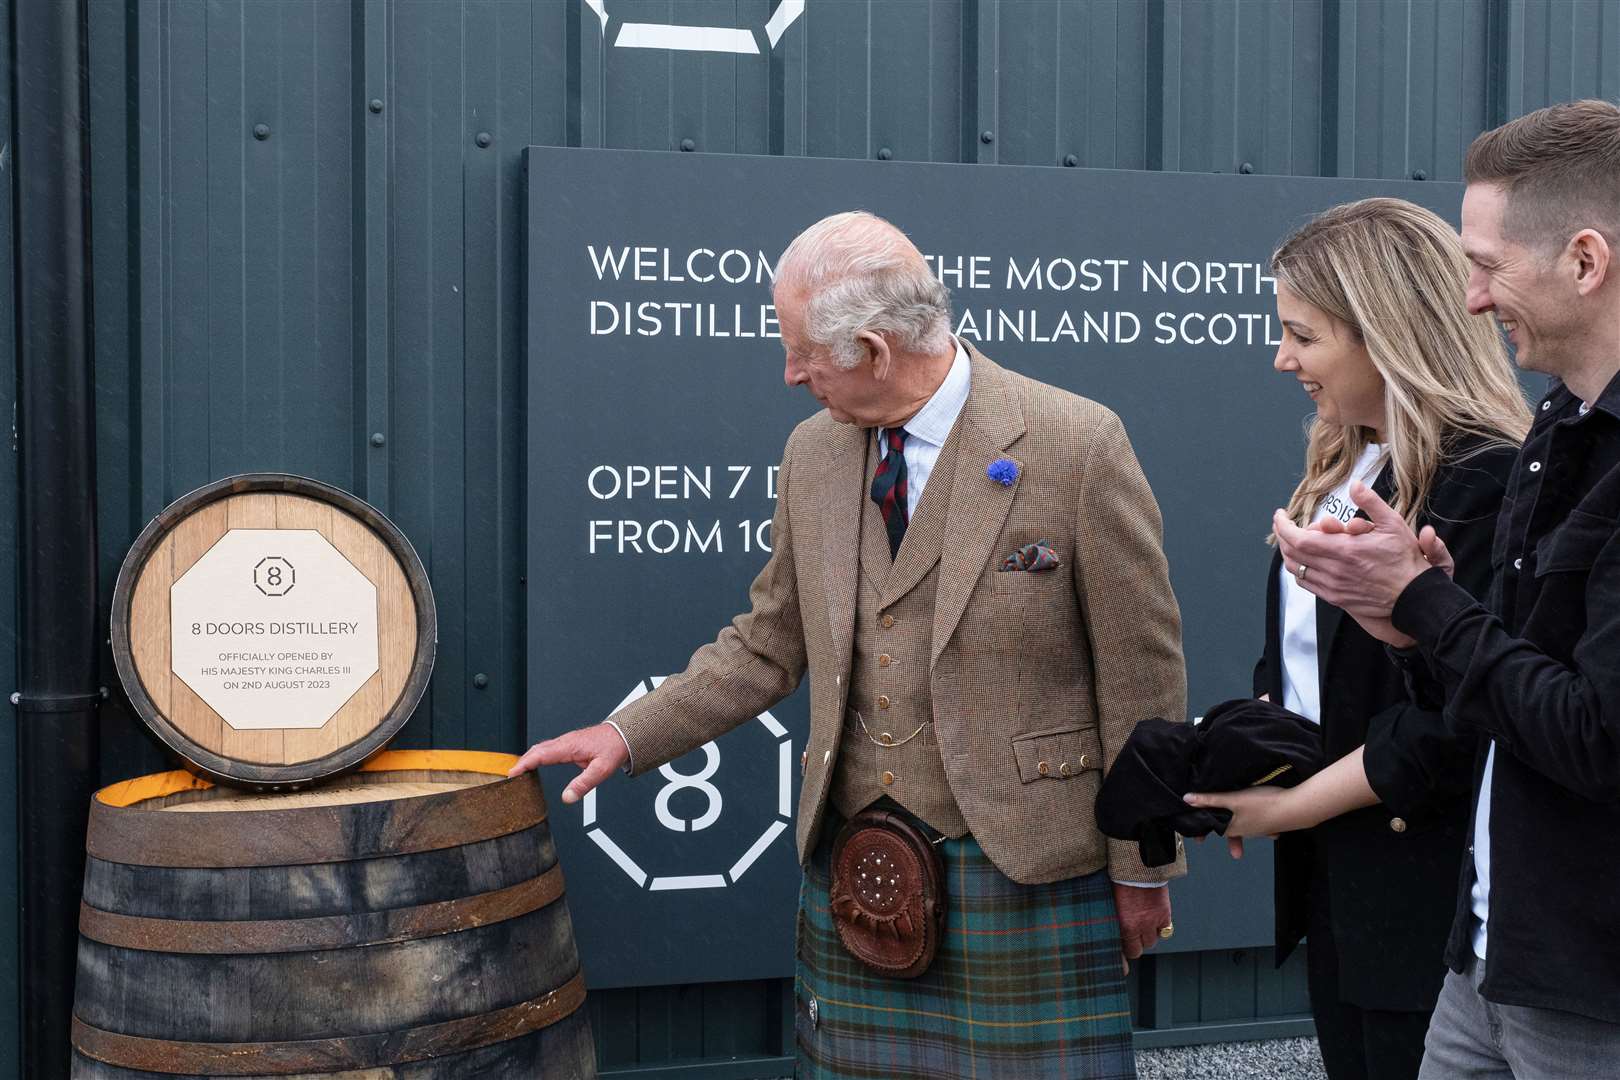 Unveiling the plaque, with distillery owners Kerry and Derek Campbell looking on. Picture: Susie Mackenzie